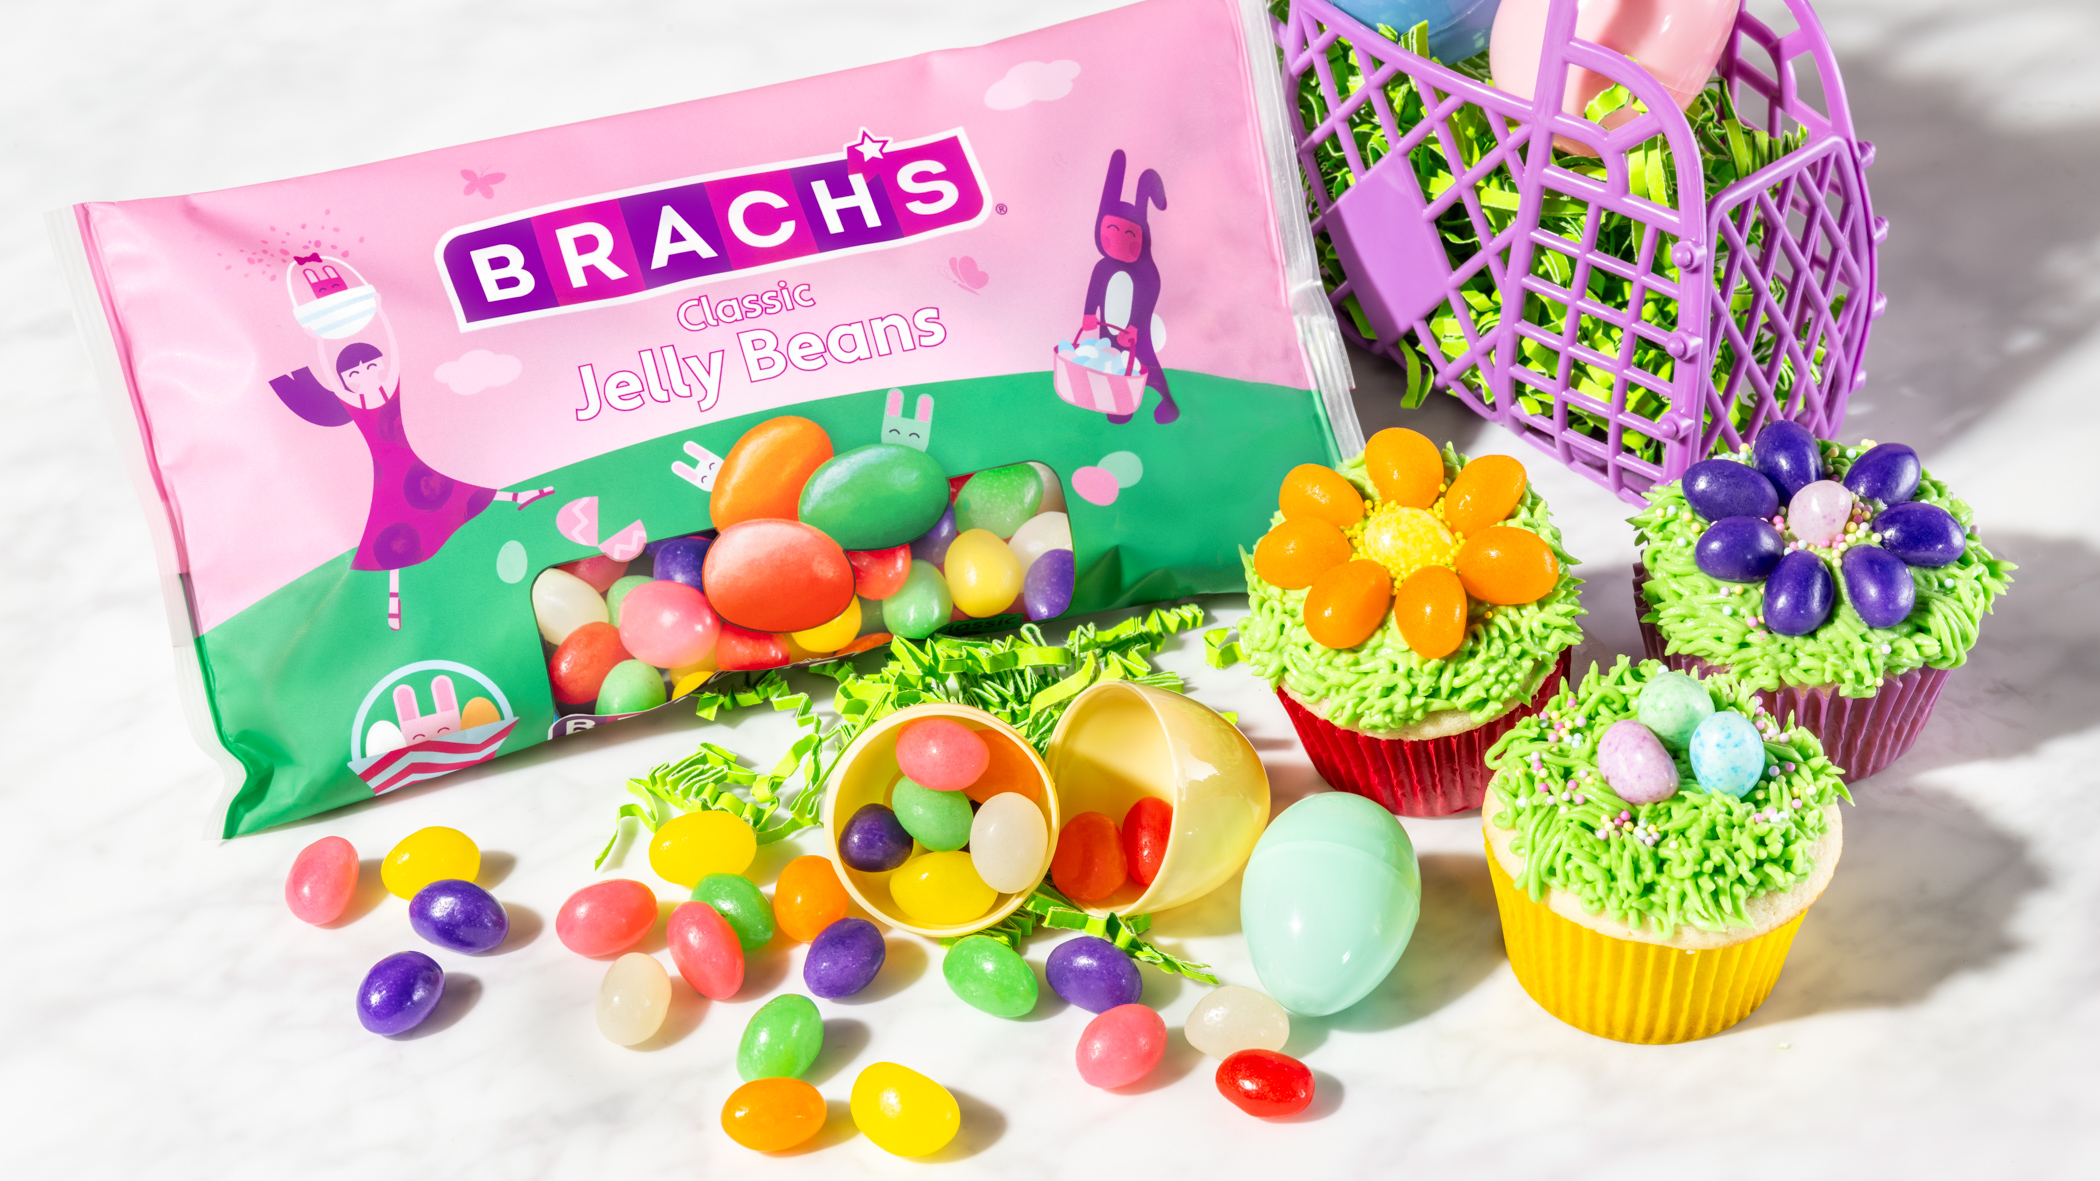 Brach's at it again with Easter Brunch Jelly Beans! 👀 Found at CVS # jellybeans 🫐 Blueberry Maple Pancake 🍩 Chocolate Glazed